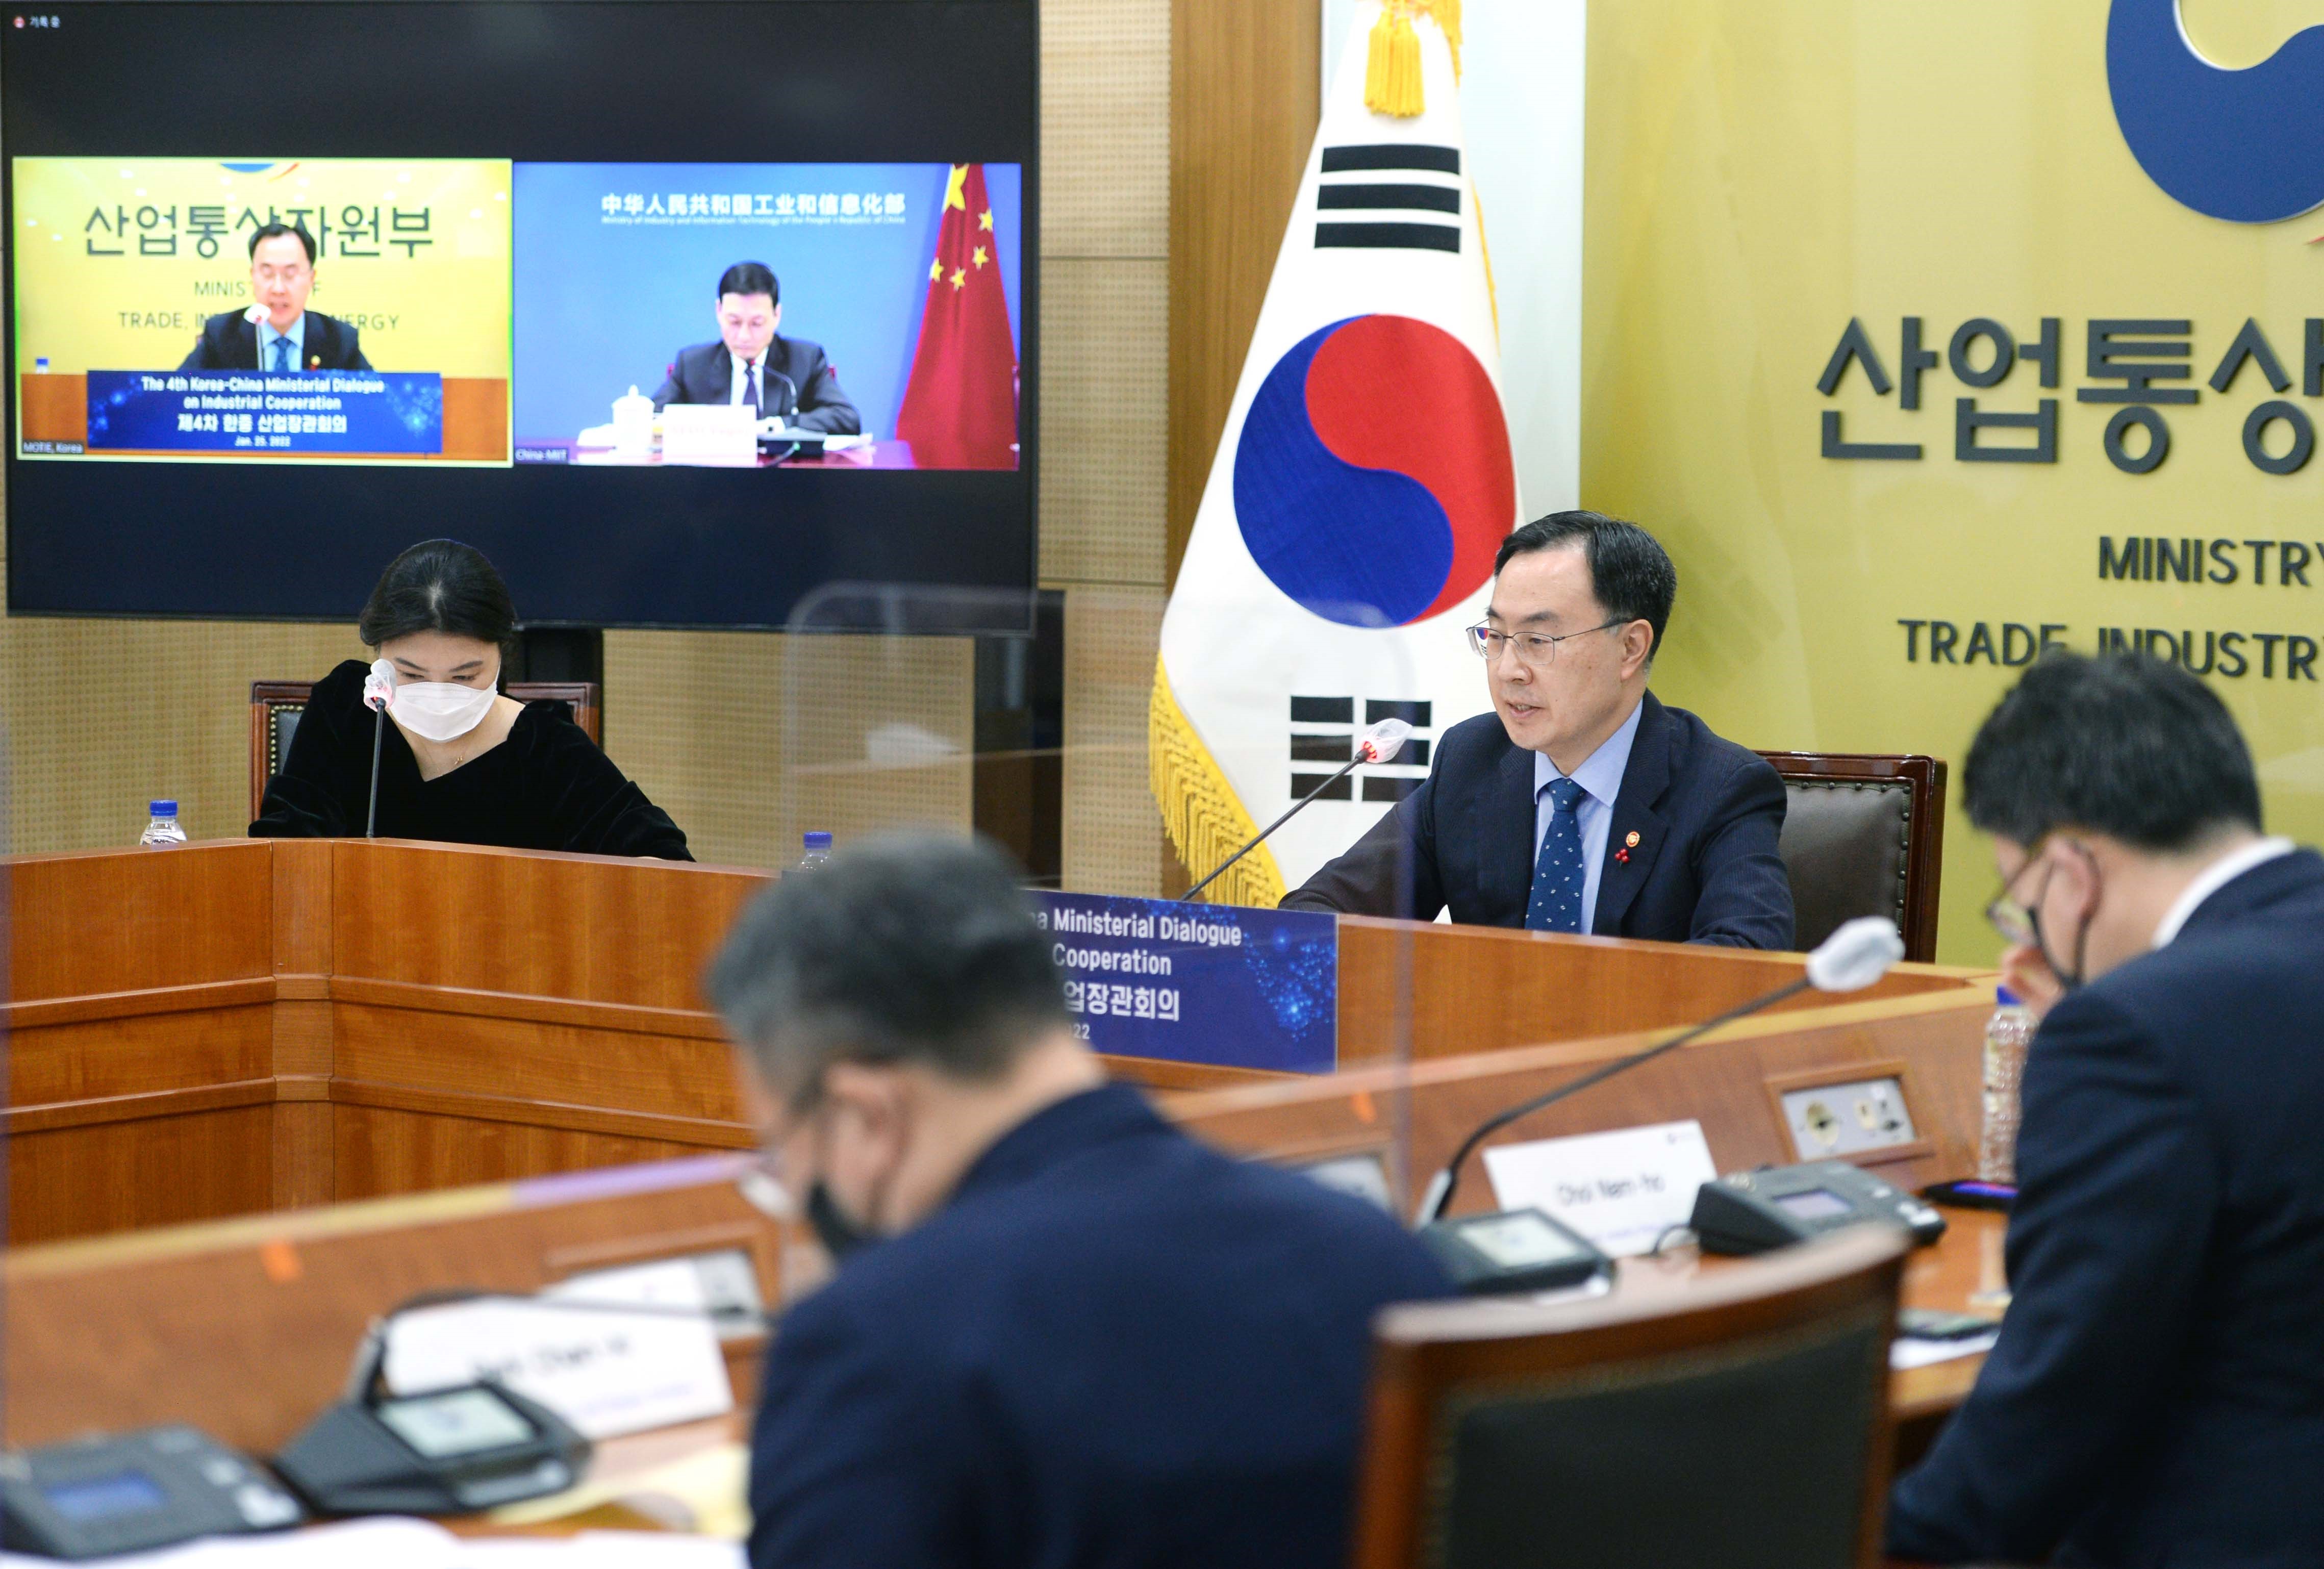 The 4th Korea-China Ministerial Dialogue on Industrial Cooperation Image 0